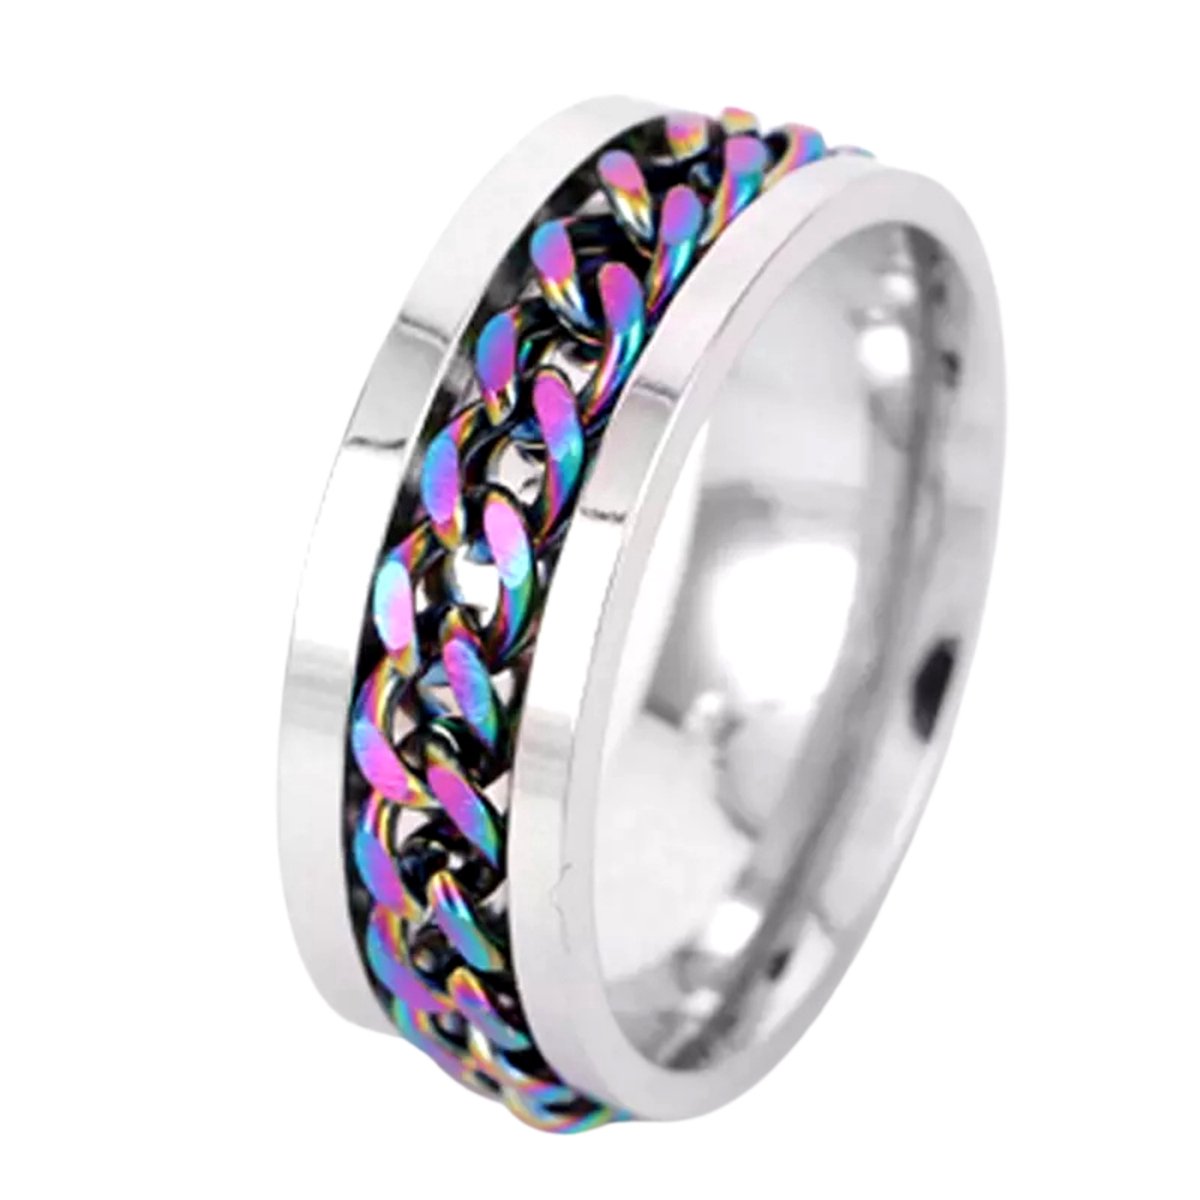 Anxiety Ring - (Kettinkje) - Stress Ring - Fidget Ring - Anxiety Ring For Finger - Draaibare Ring - Spinning Ring - Regenboog - (21.75mm / maat 68)